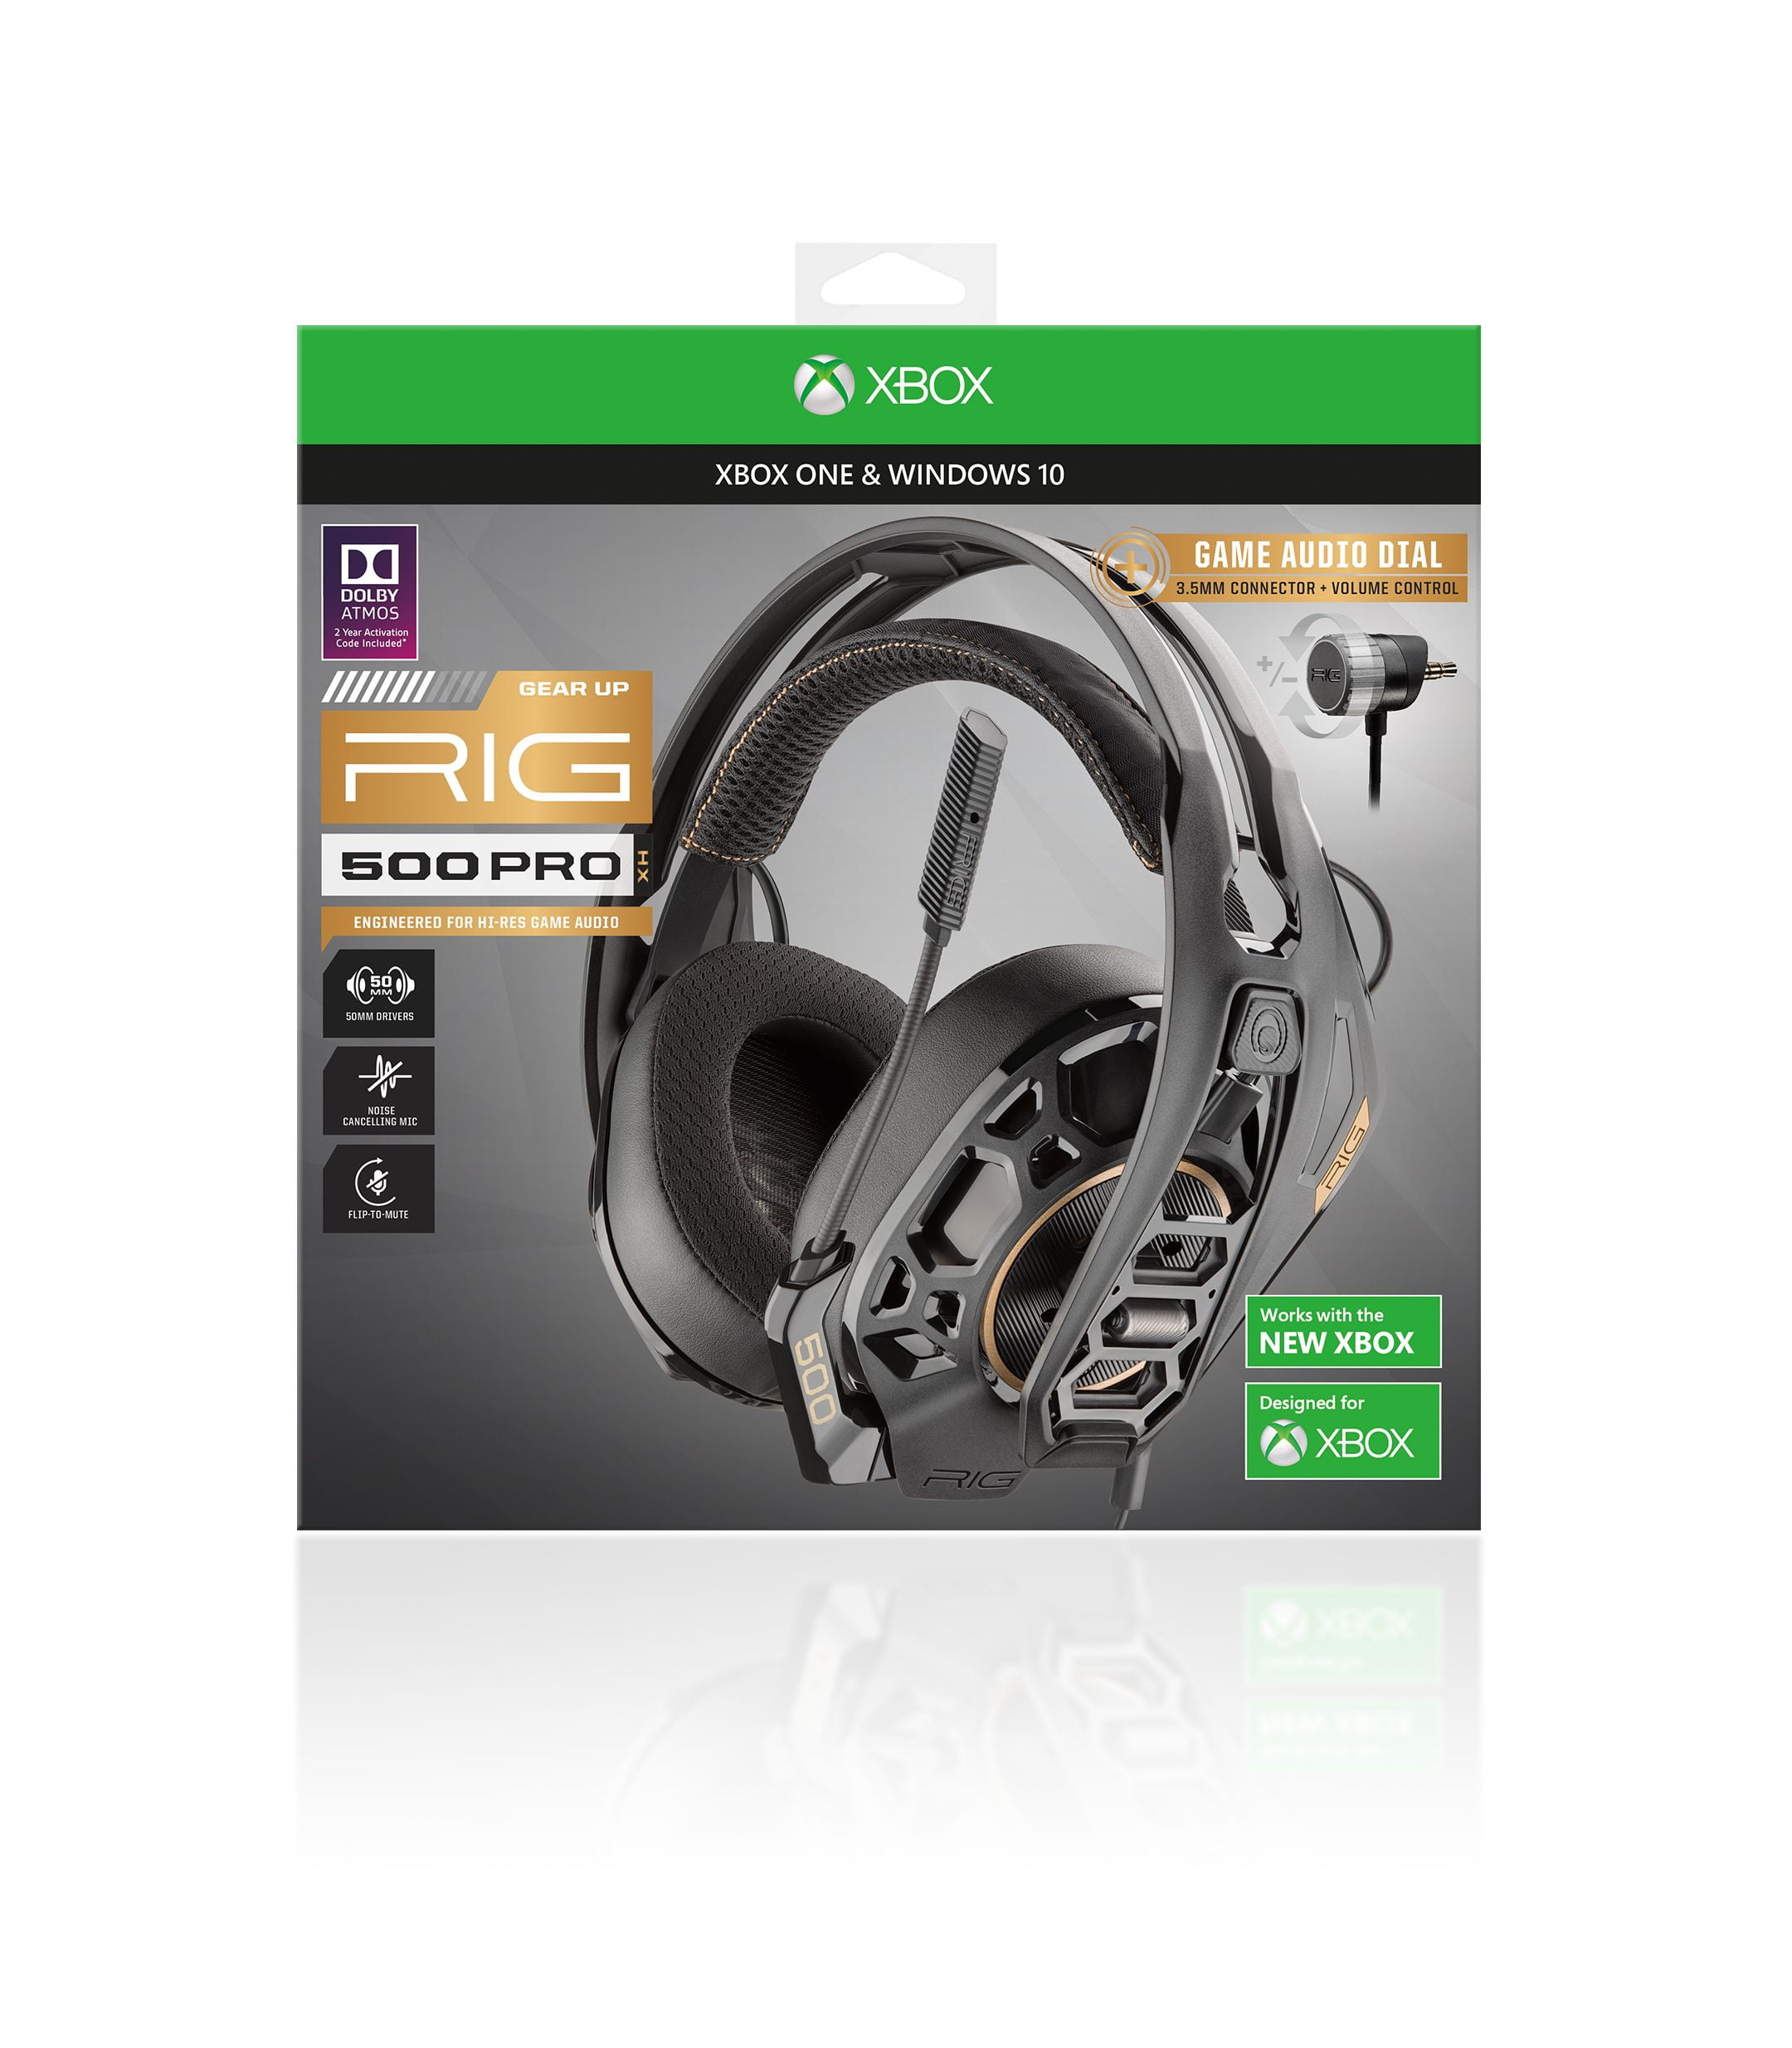 herberg vreemd Dhr RIG 500 PRO HX Dolby Atmos Gaming Headset for Xbox One - Walmart.com